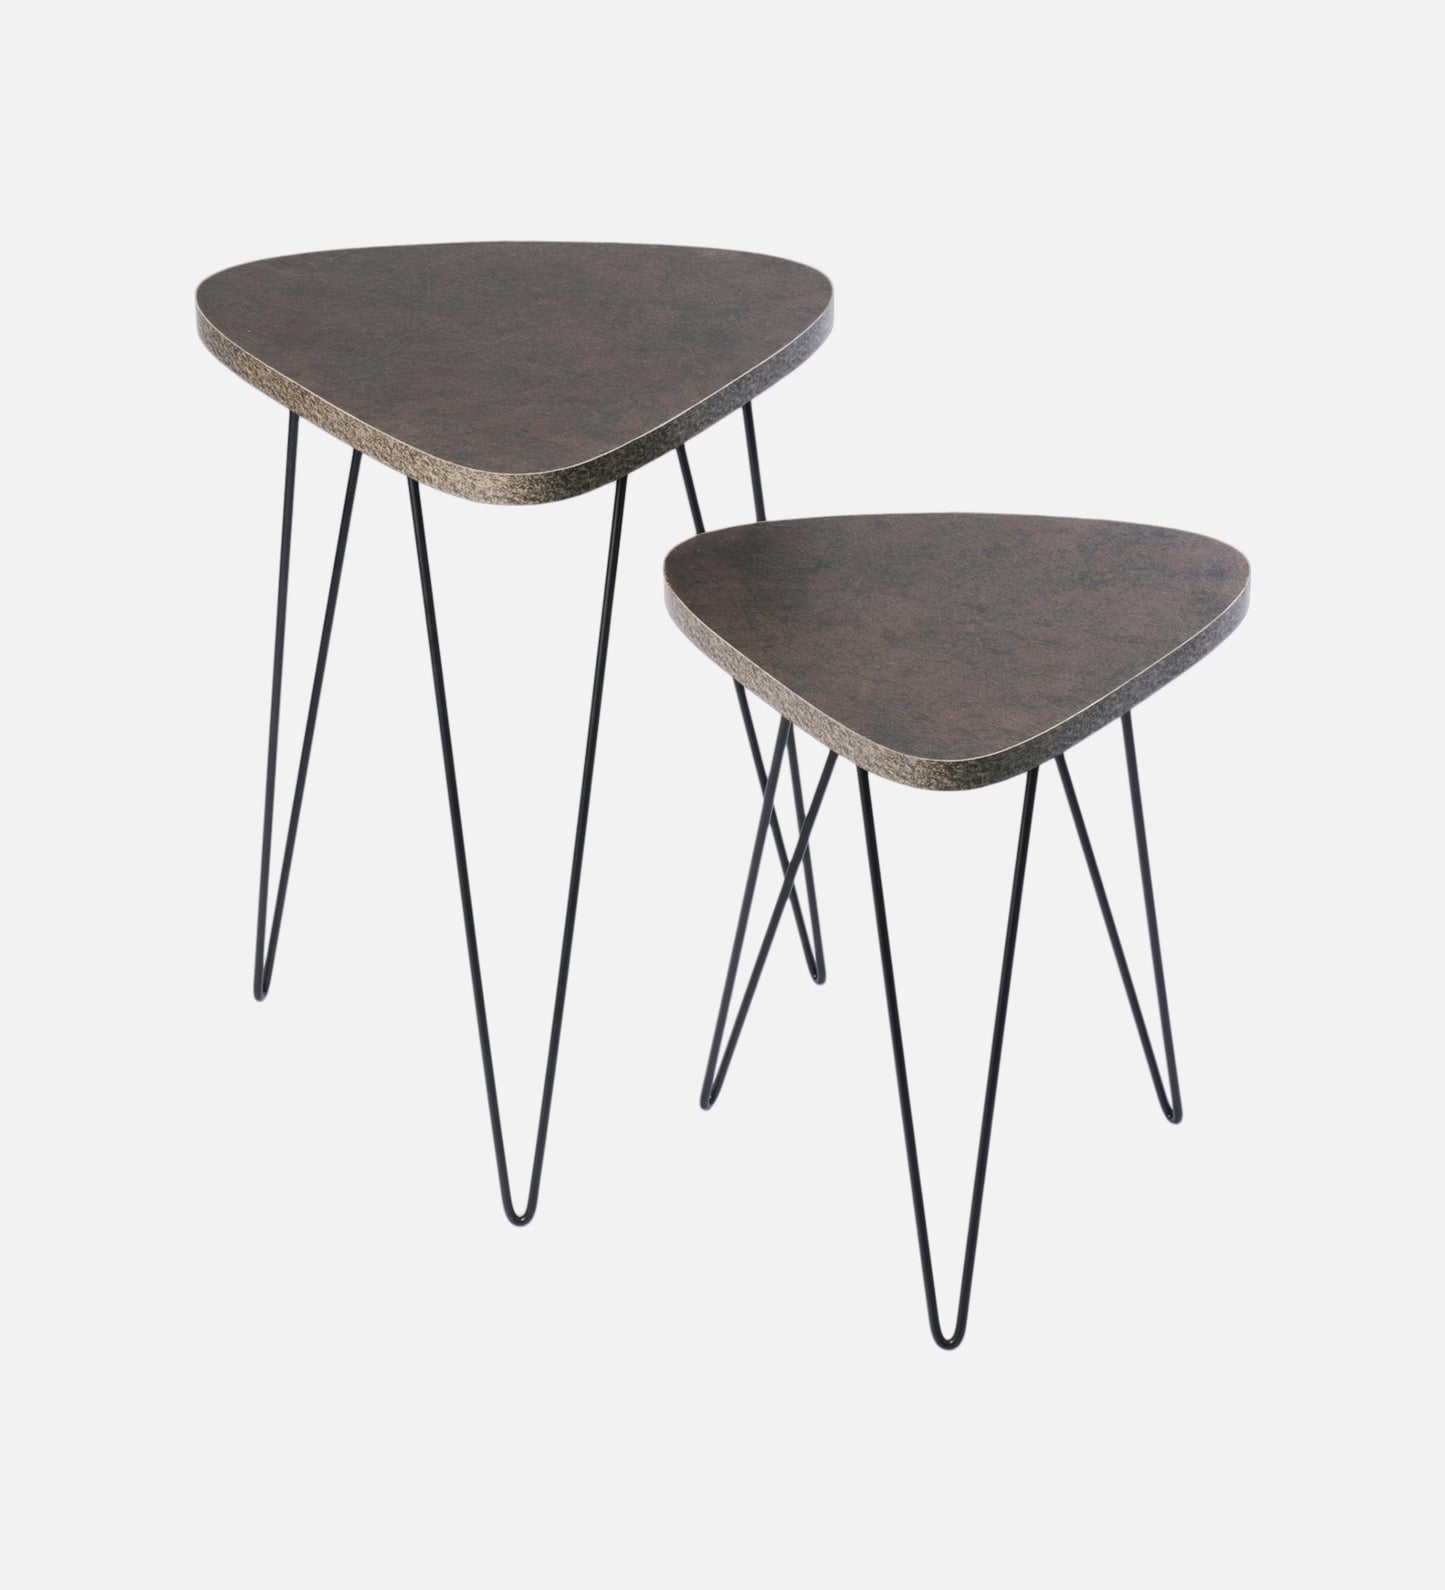 Twilight Trinity Nesting Tables with Hairpin Legs, Side Tables, Wooden Tables, Living Room Decor by A Tiny Mistake